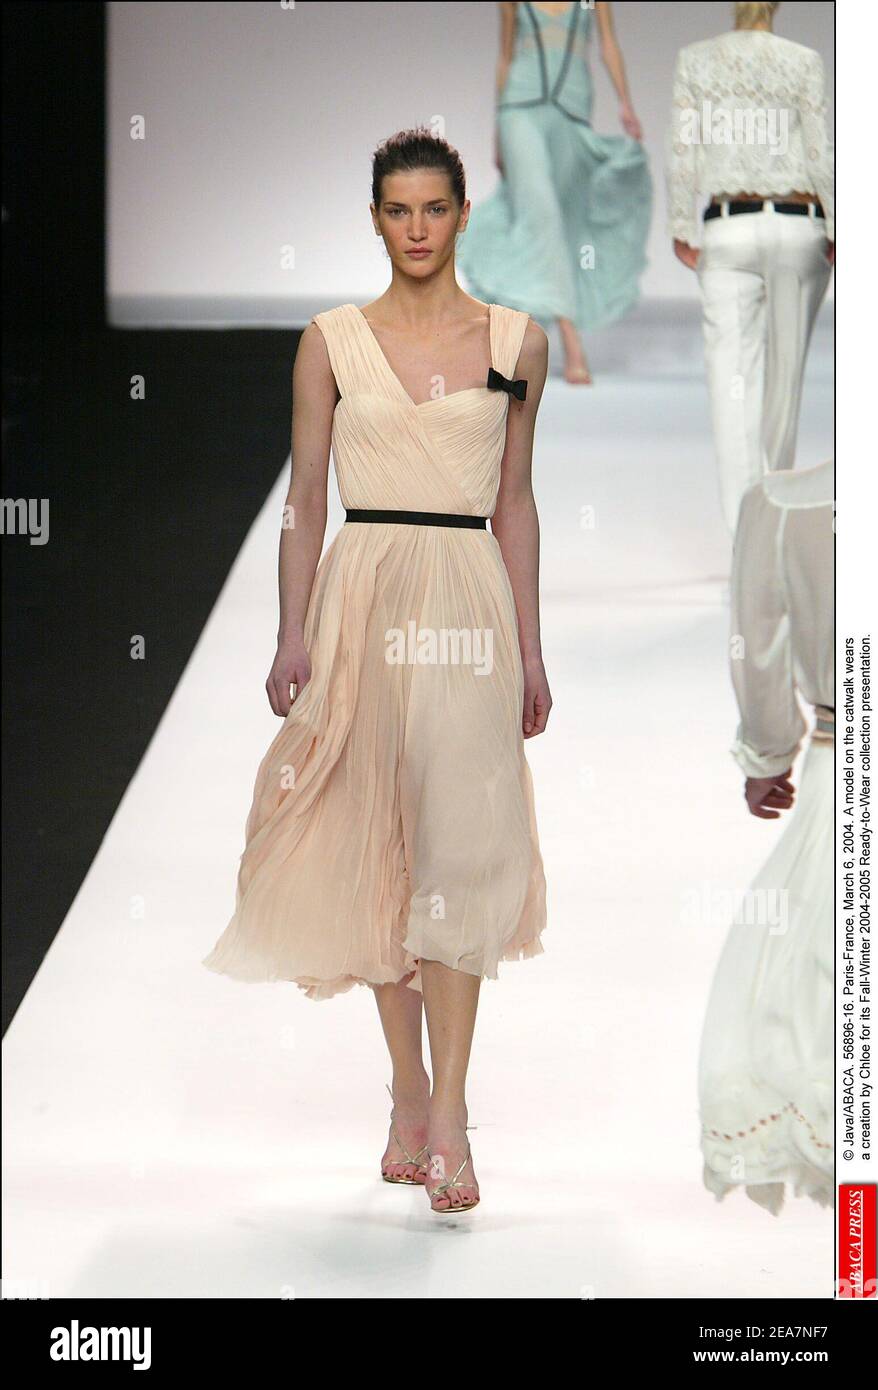 © Java/ABACA. 56896-16. Paris-France, March 6, 2004. A model on the catwalk wears a creation by Chloe for its Fall-Winter 2004-2005 Ready-to-Wear collection presentation. Stock Photo